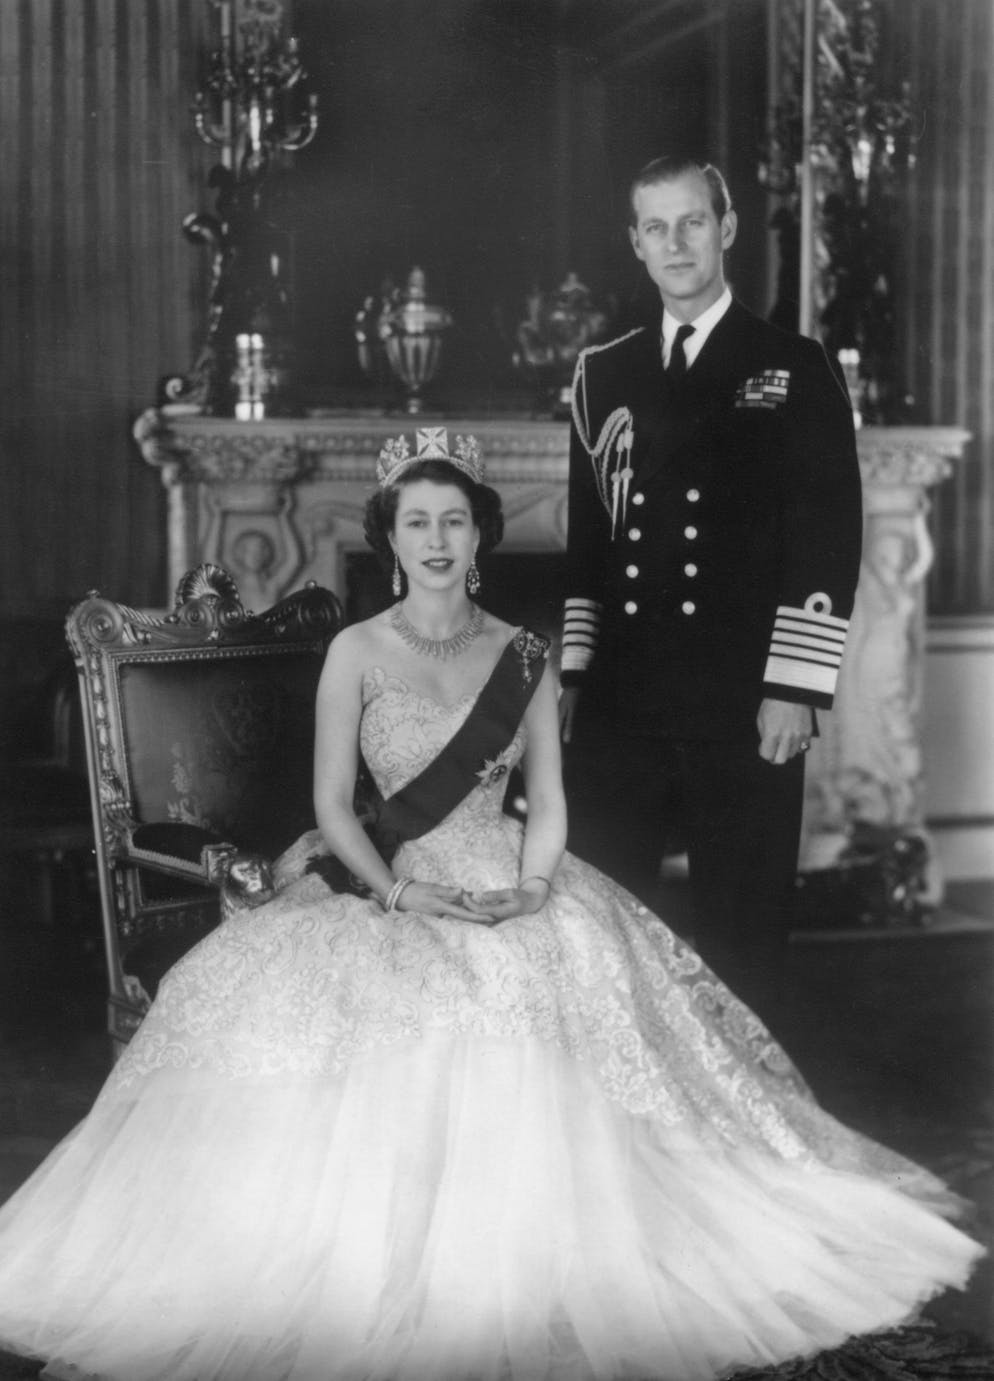 Special role in coronation: King Charles breaks royal rules for Prince George.  In 1953, the whole thing seemed even stranger.  Here you can see Queen Elizabeth II and Prince Philip shortly before their coronation. 